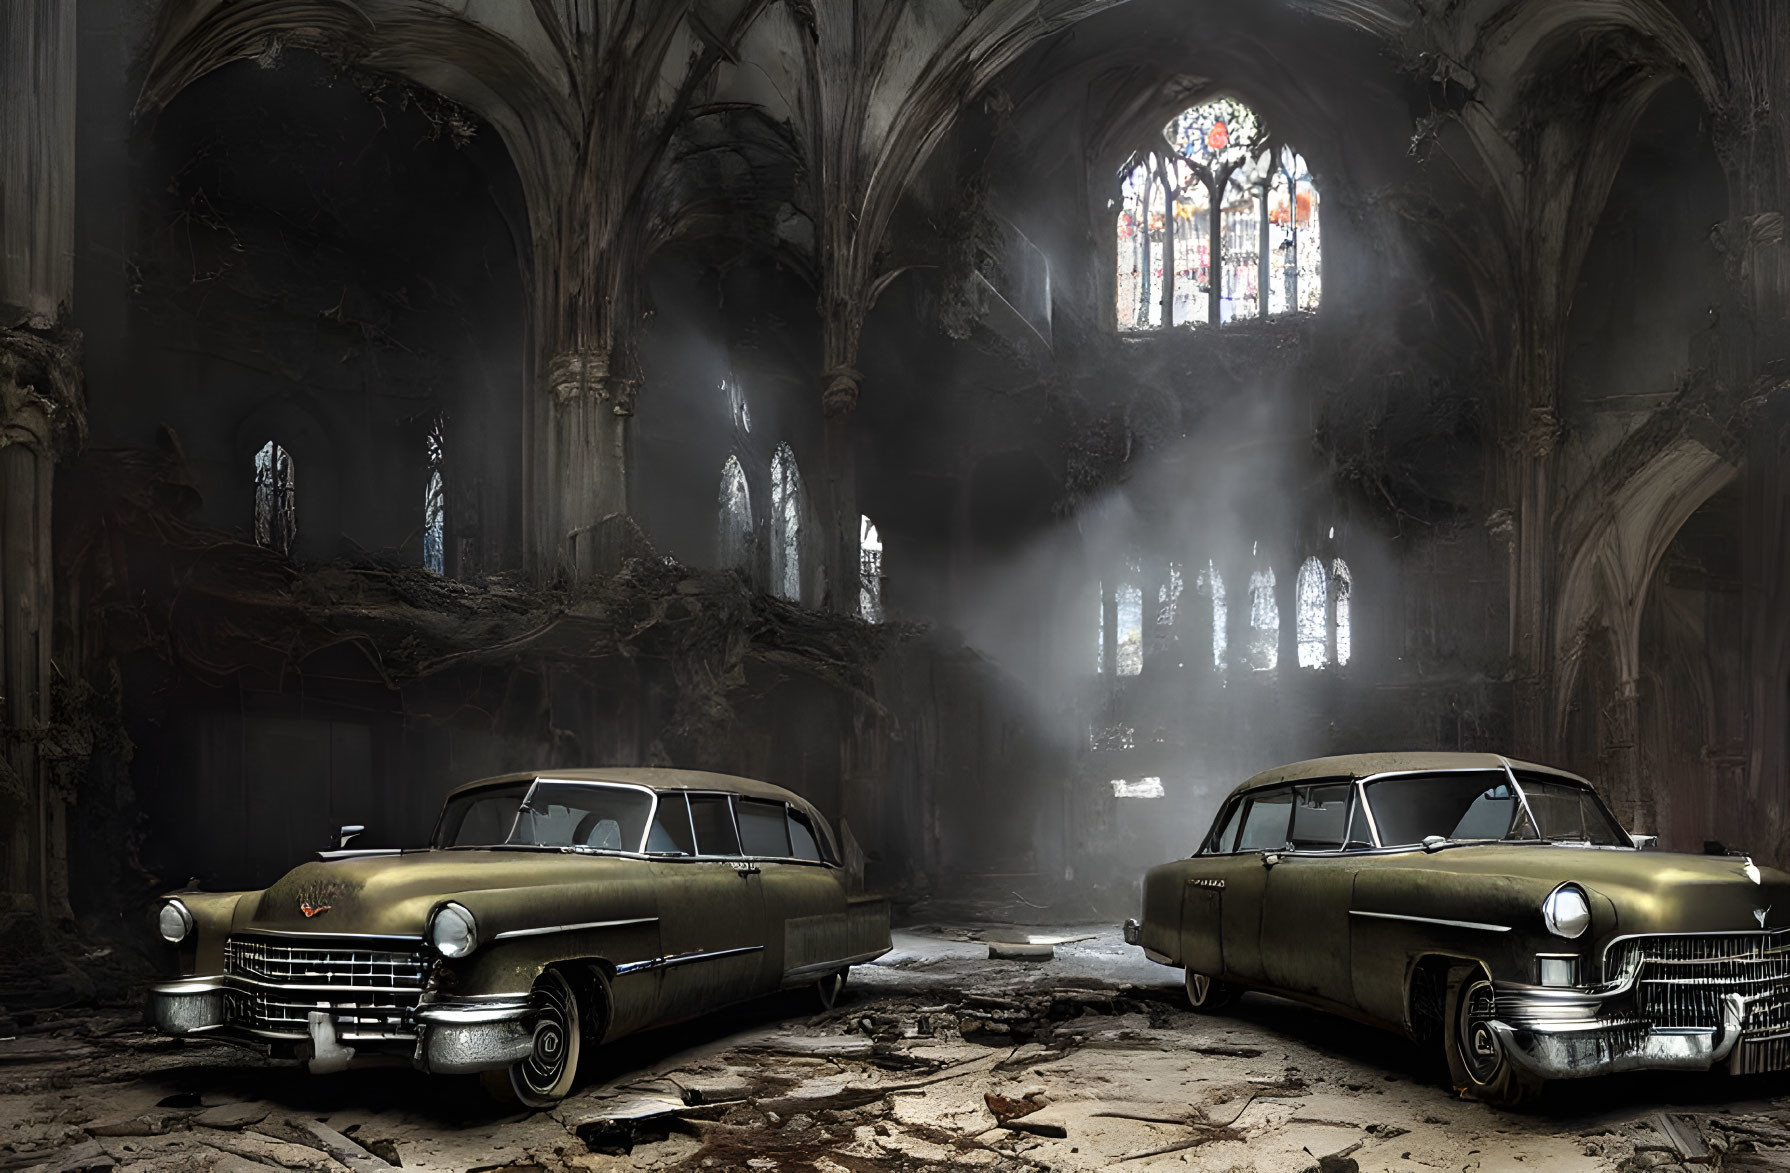 Vintage cars in Gothic church with stained-glass window and dust particles.